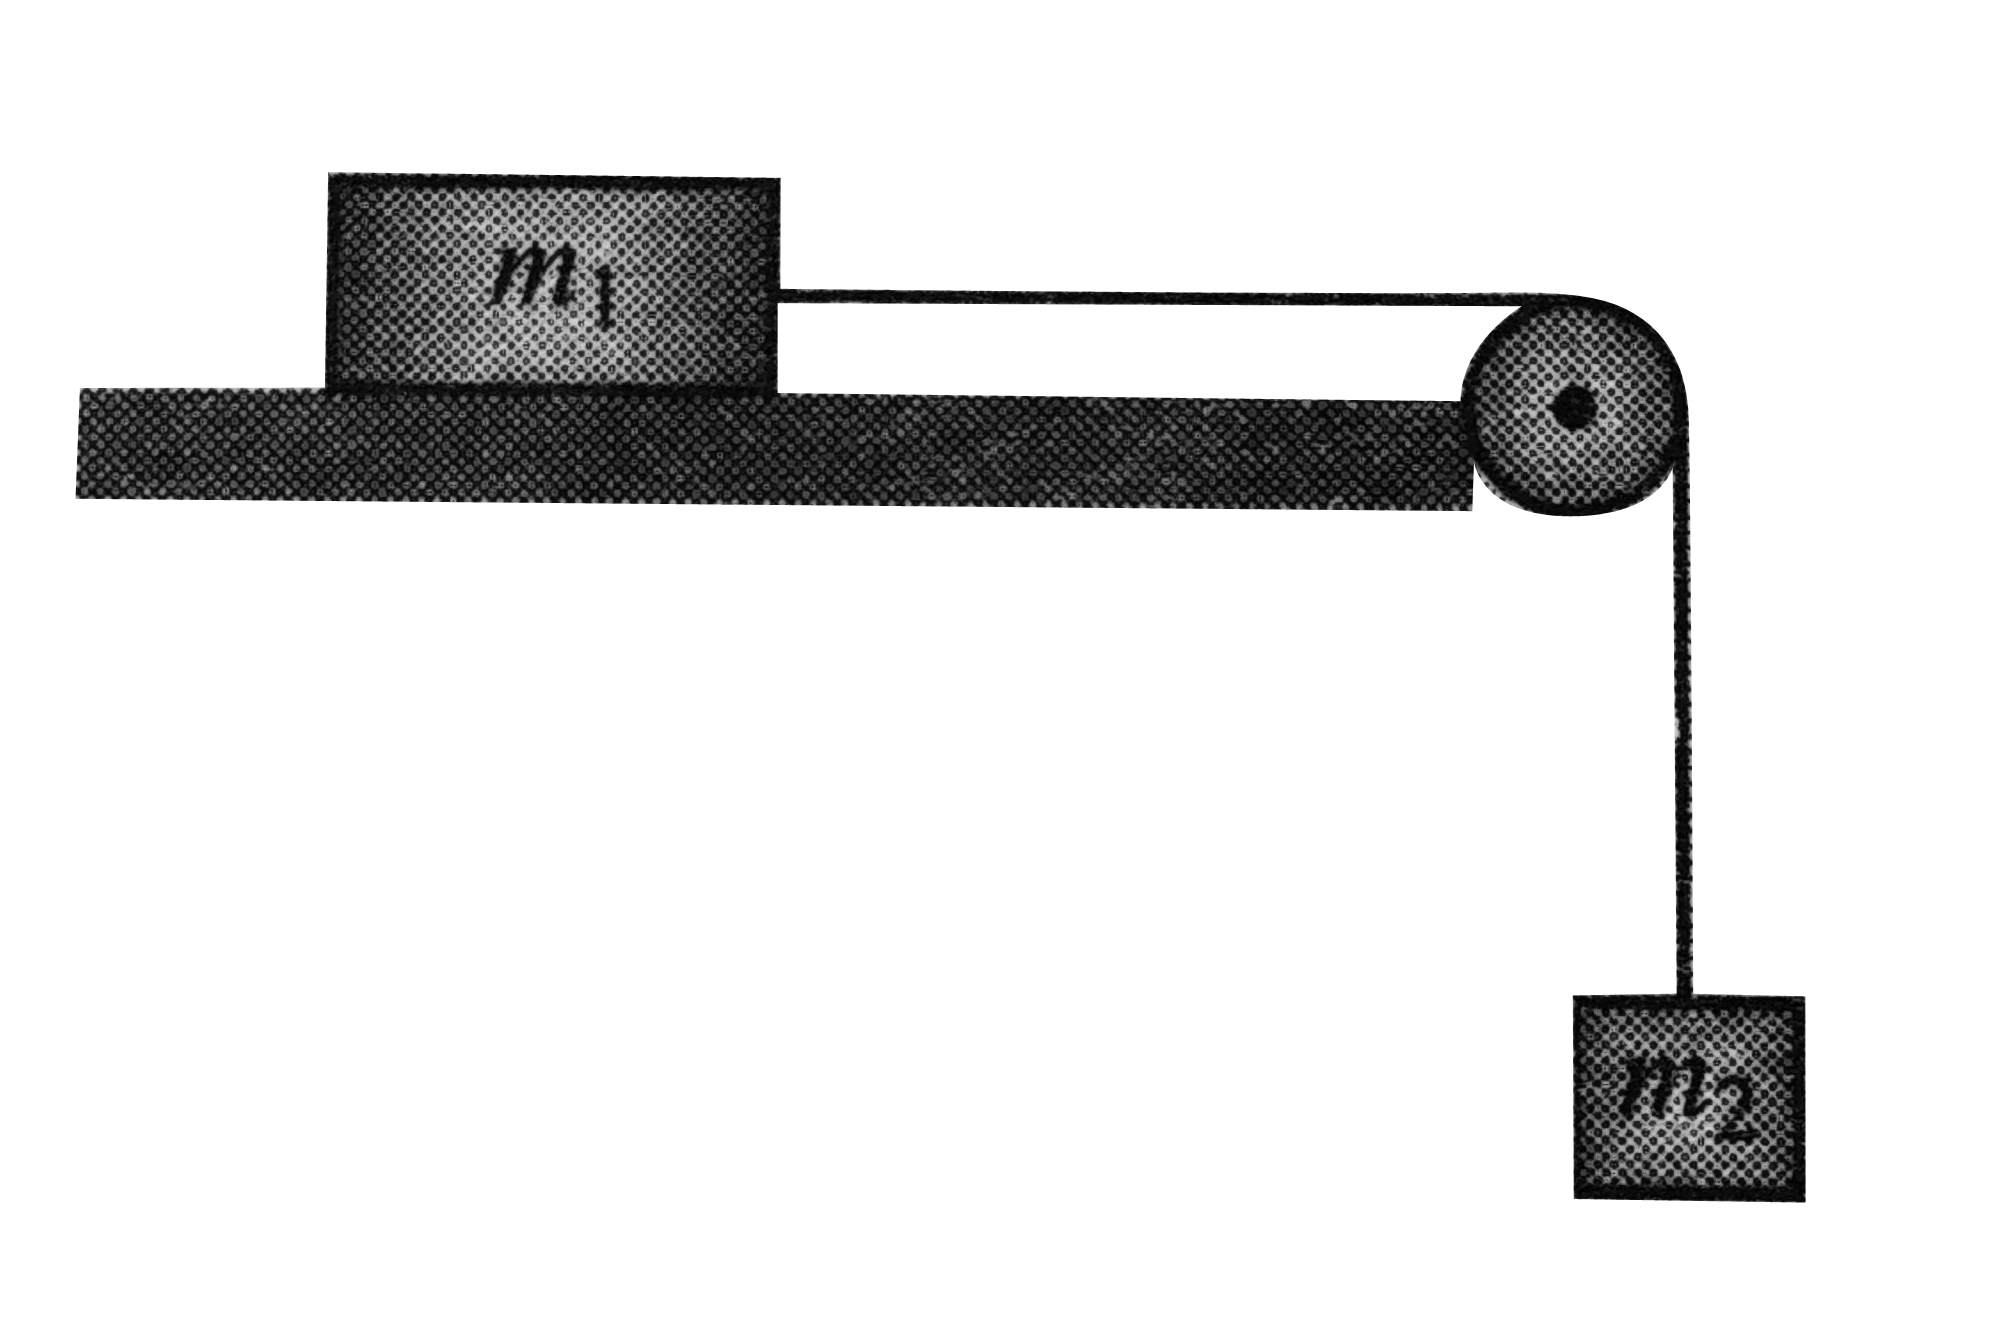 Two blocks are connected by a string, as shown in figure. They are released from rest. Show that after they have moved a distance L, their common speed is given by v=sqrt(2(m2-mum1)gL//(m1+m2)), in which mu is the coefficient of kinetic friction between the upper block and the surface. Assume that the pulley is massless and frictionless.